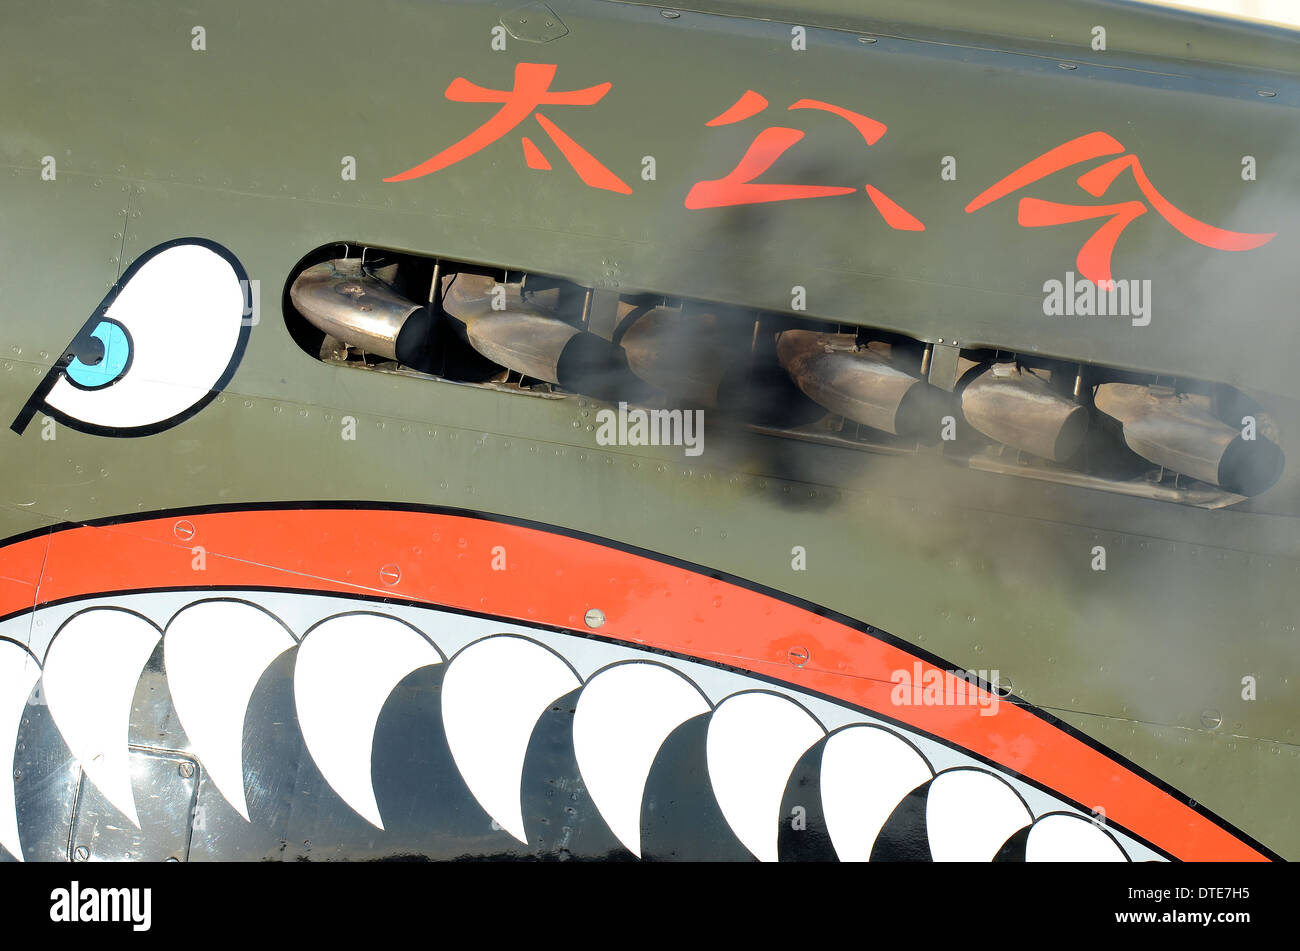 This shark mouth nose art is on a P-40 KittyHawk, seen here starting up with clouds of exhaust smoke. Hood Aerodrome, New Zealand Stock Photo